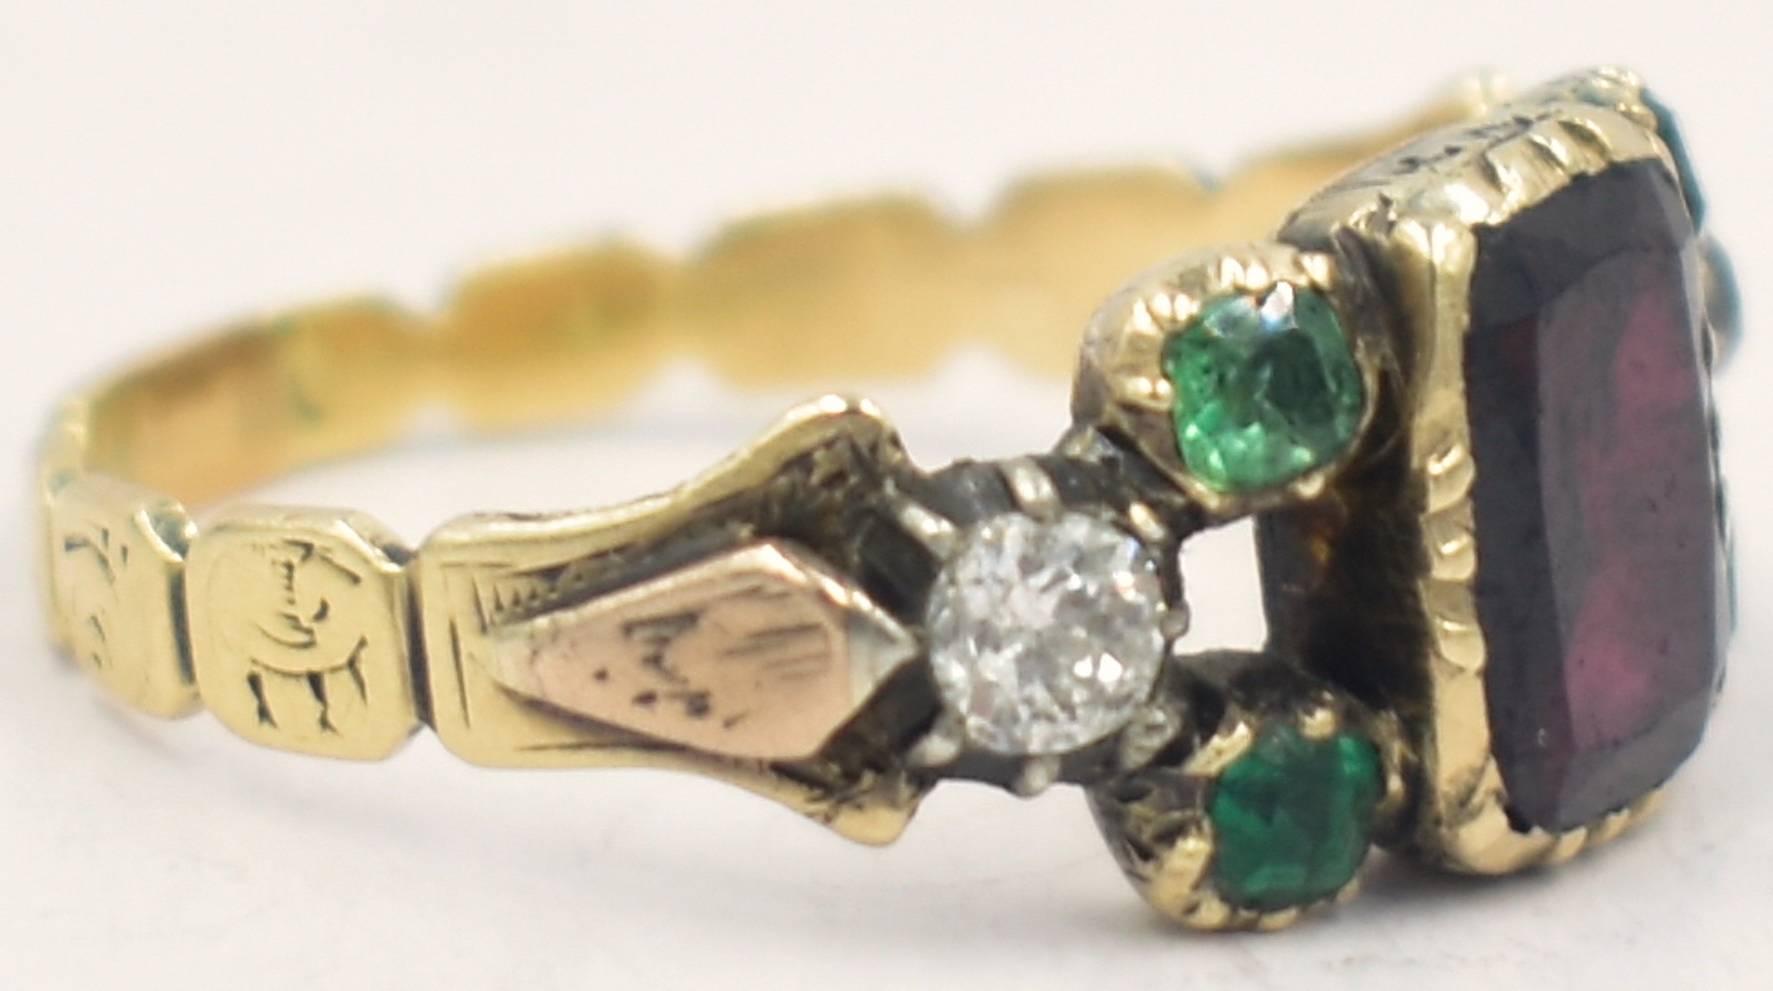 Delightful Georgian multi-stone ring with a large garnet in the center, two emeralds on each side with a diamond attaching each of them to the beautifully engraved 15K gold band on either end. Completely described in one sentence! What more can I